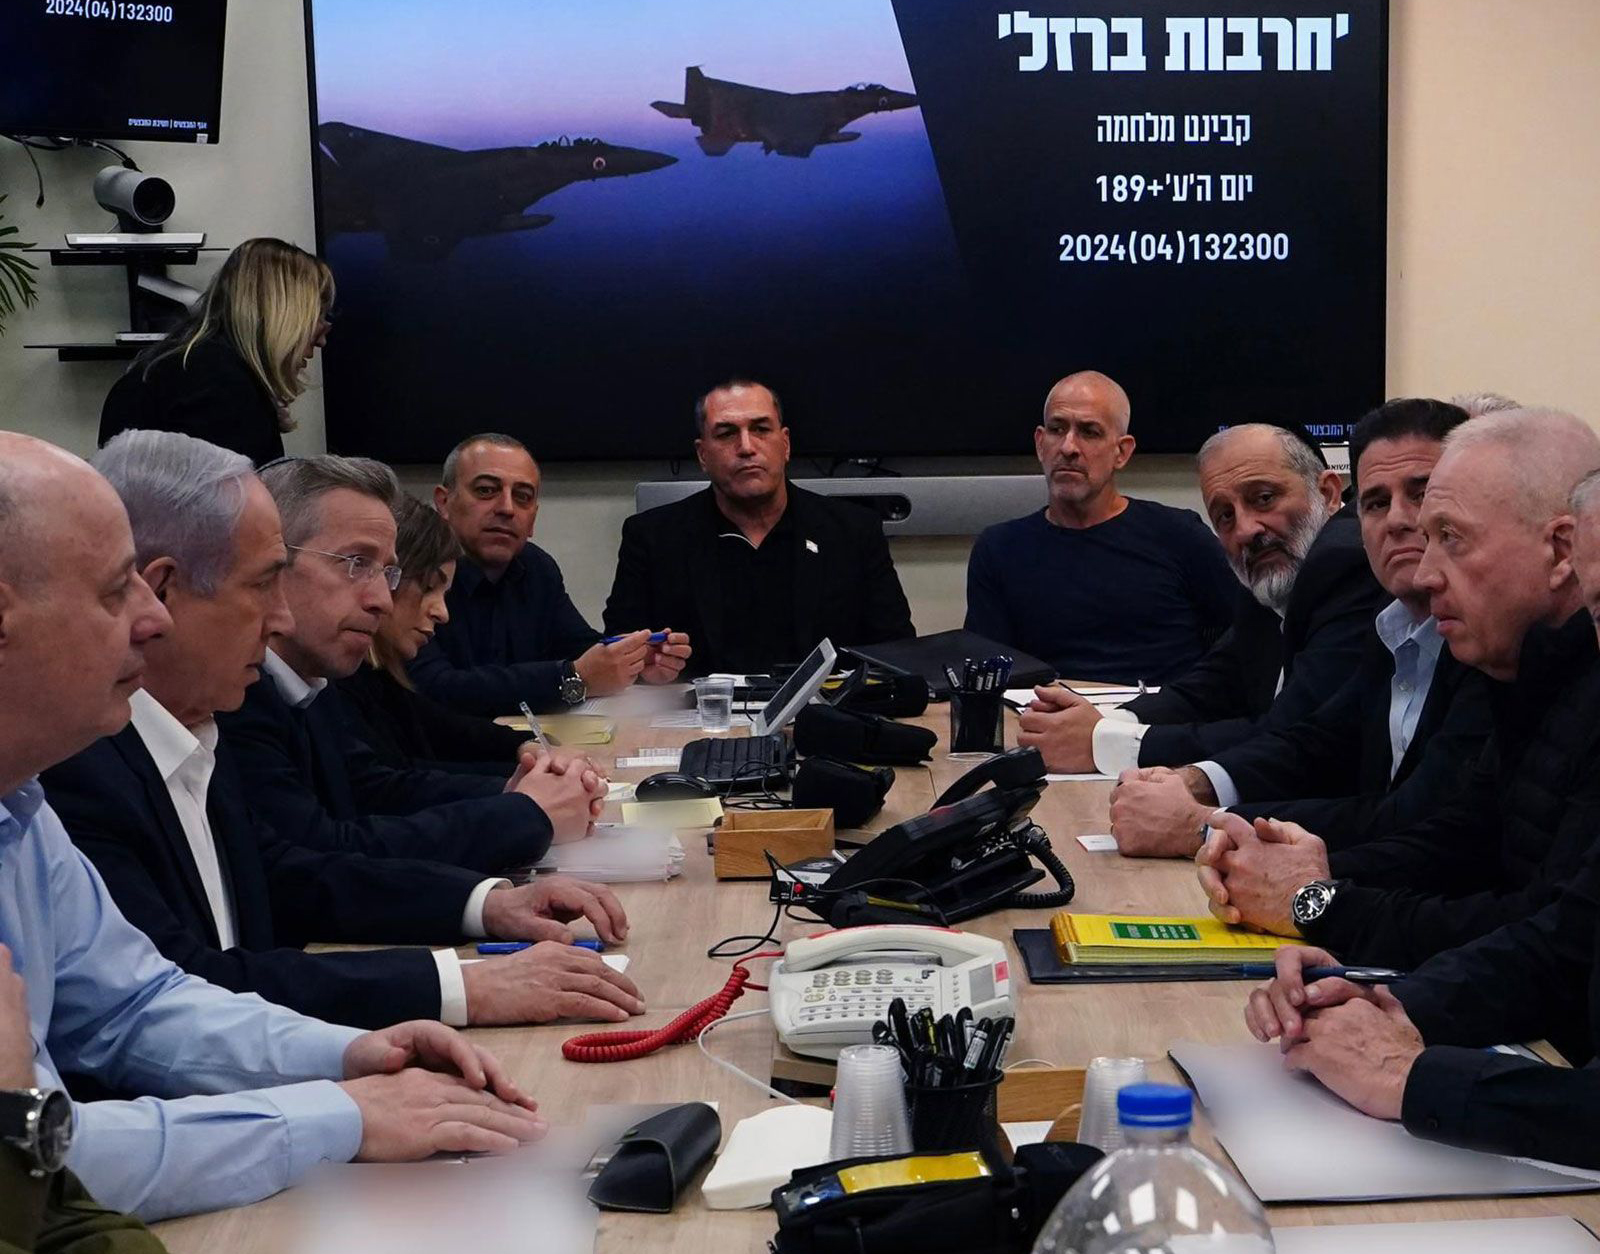 This handout photo, released early Sunday local time, shows Israeli Prime Minister Benjamin Netanyahu, second from left, as he meets with members of his war cabinet at the Ministry of Defense in Tel Aviv, Israel. Portions of this photo have been blurred by the source.